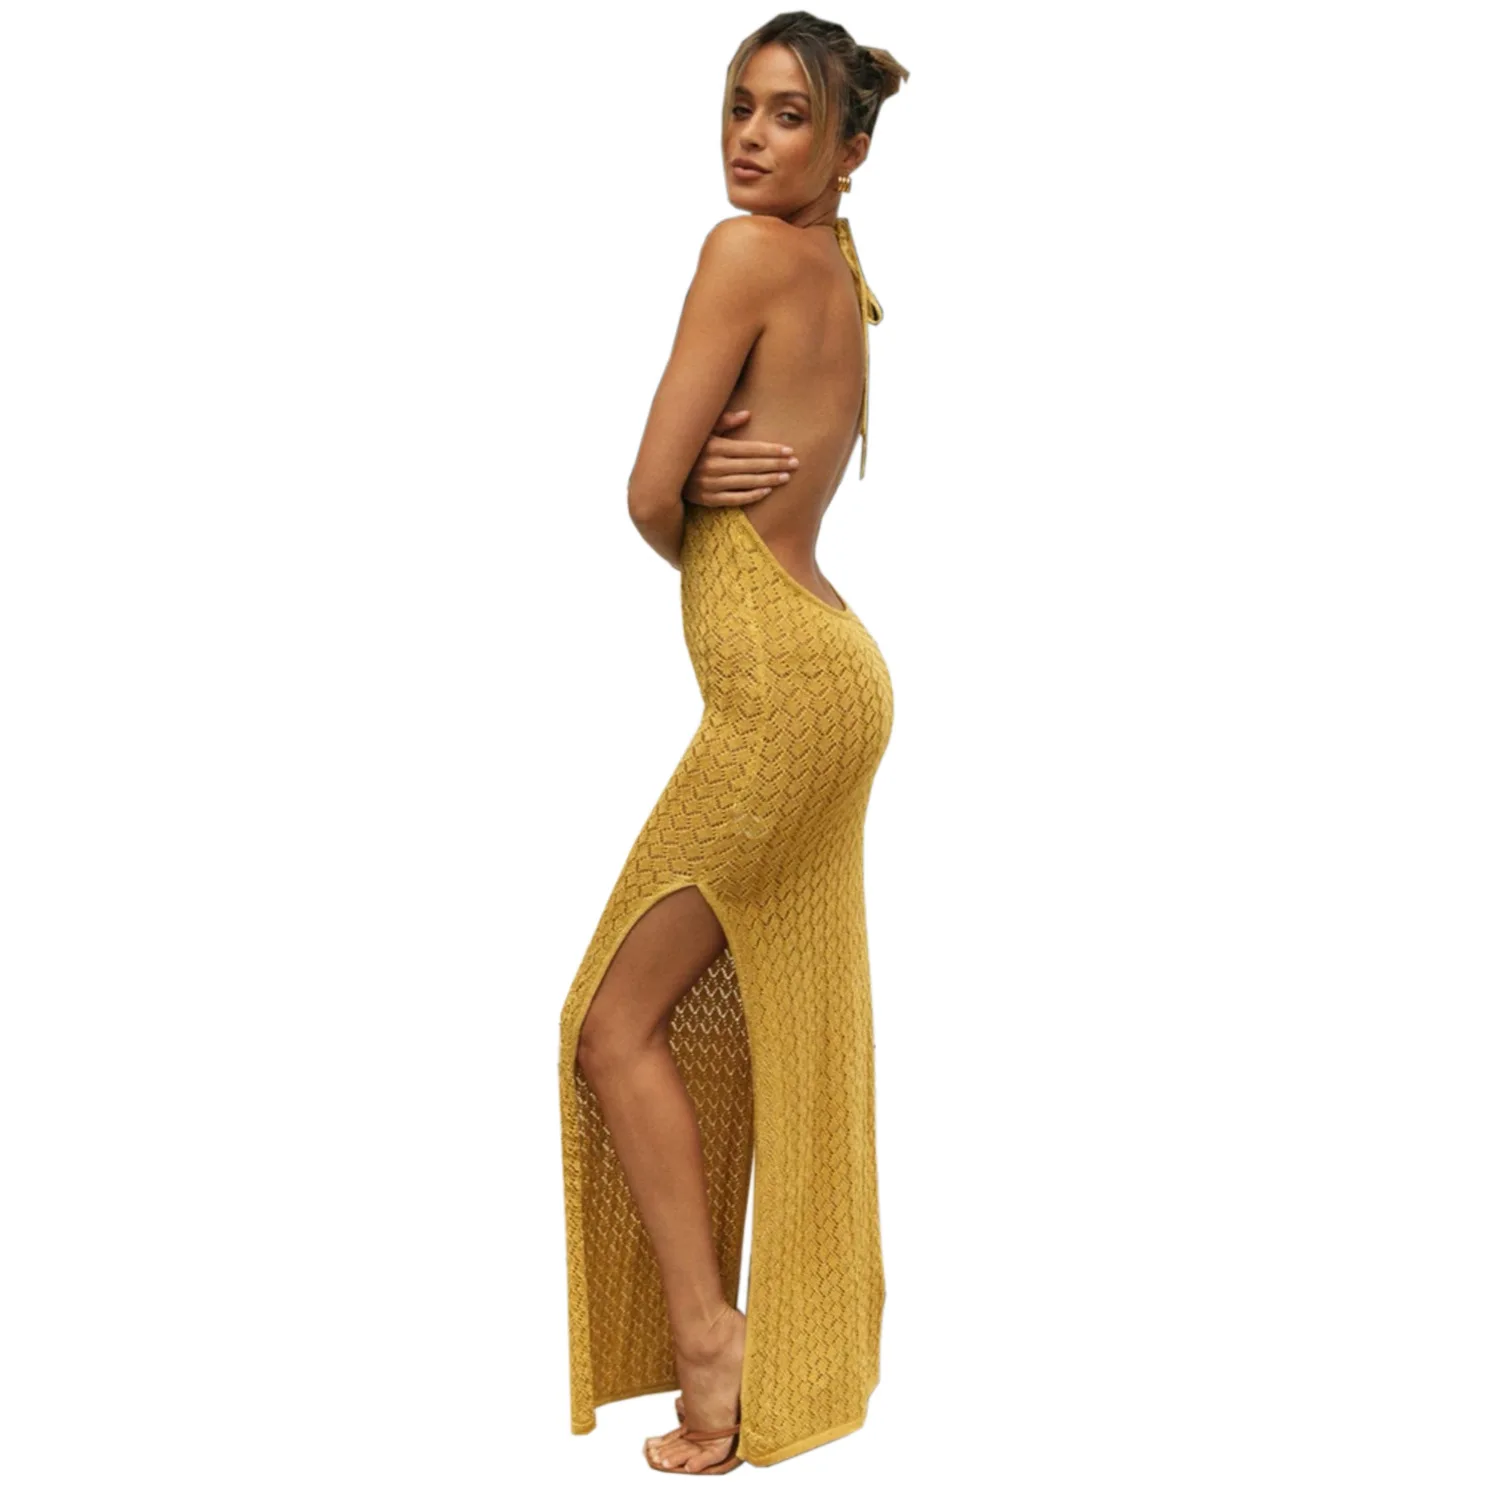 

New Women Casual Dresses Halter Sexy Backless Plain Color Knitted Party Summer Vacation Dress Clothing Fashion 2021, As picture and also can make as your request